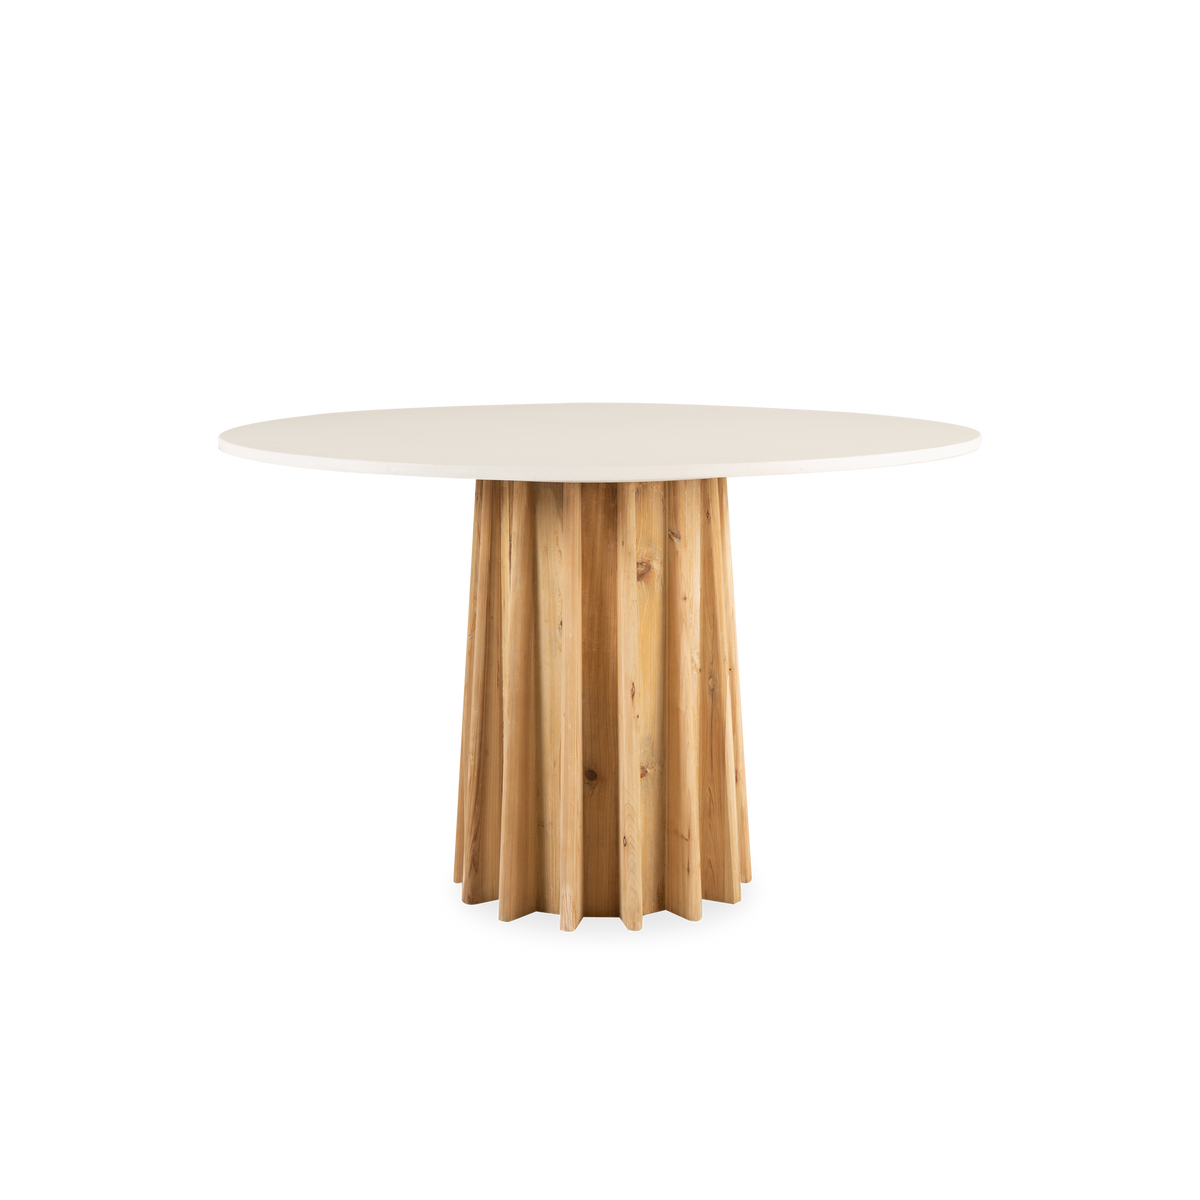 Crafted with concrete and reclaimed pine, the Polson Dining Table is simple yet sophisticated.